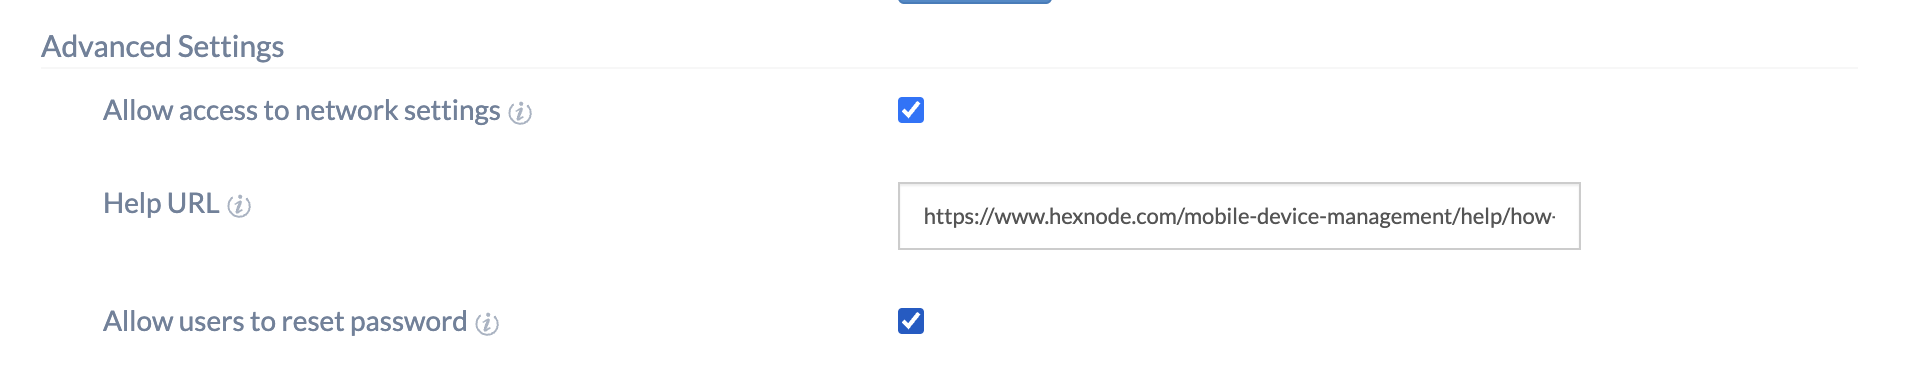 Setup advanced setting in Hexnode Access while allowing login to Windows using IdPs